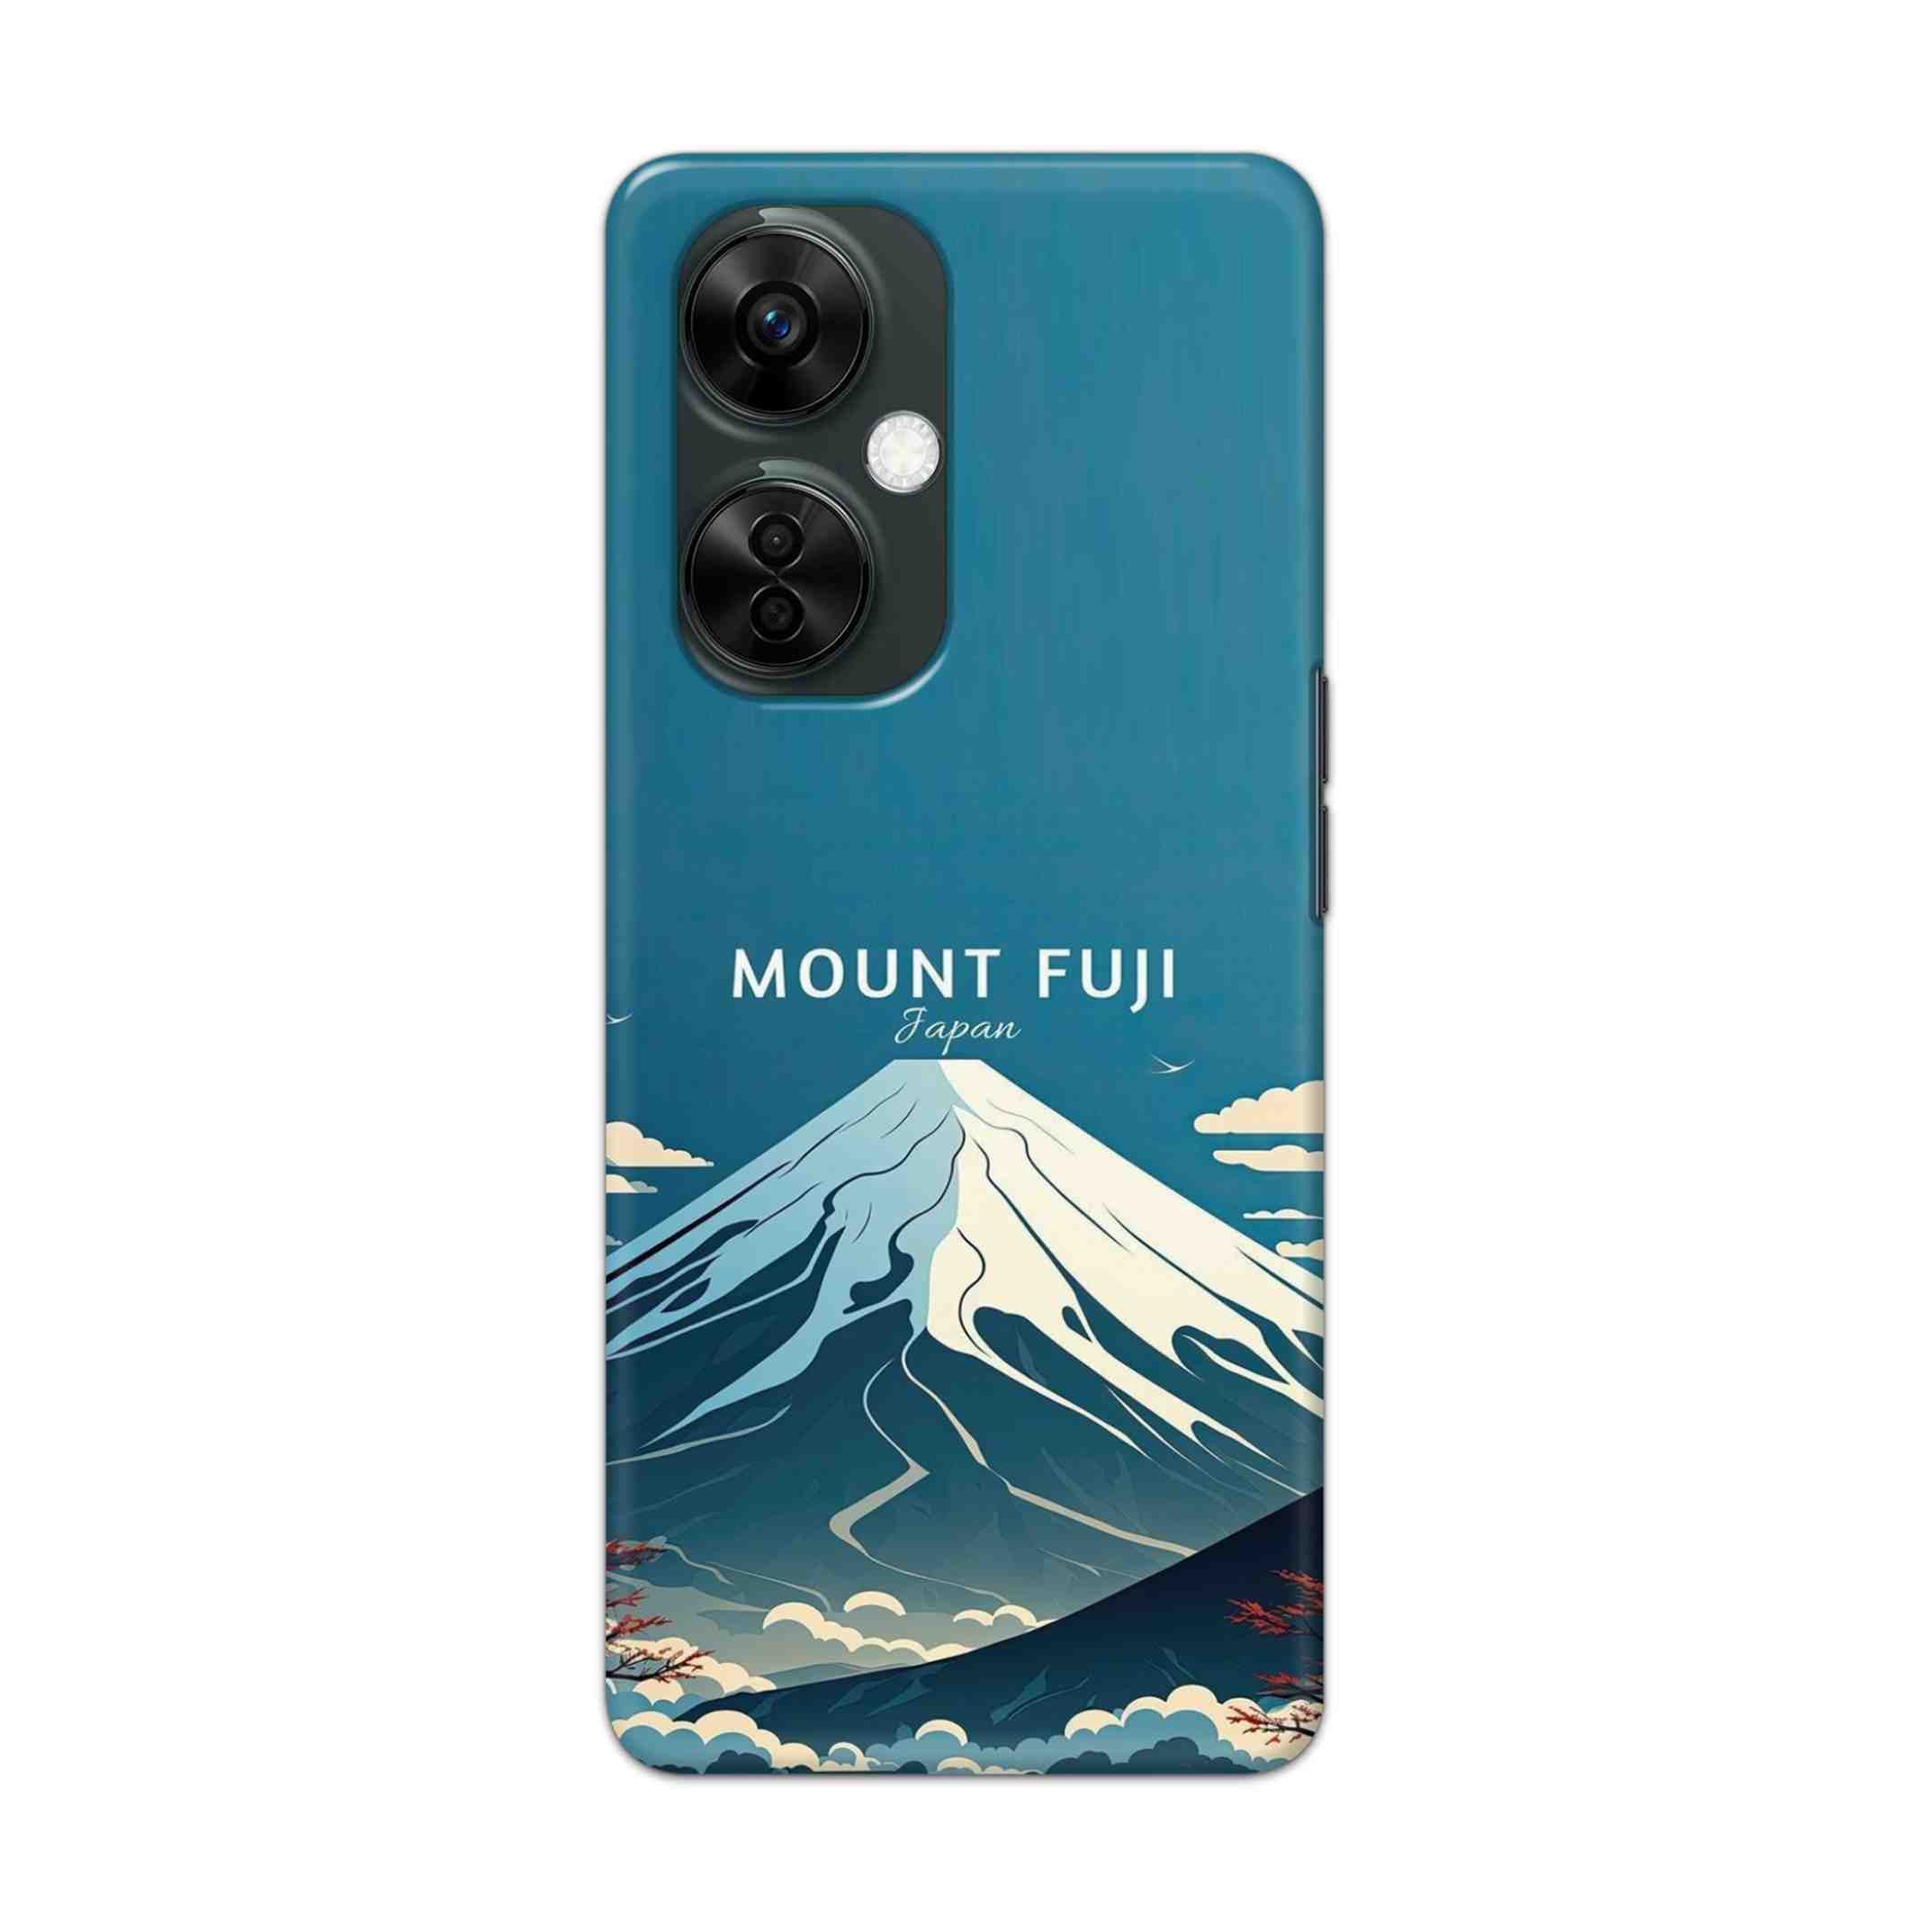 Buy Mount Fuji Hard Back Mobile Phone Case Cover For Oneplus Nord CE 3 Lite Online